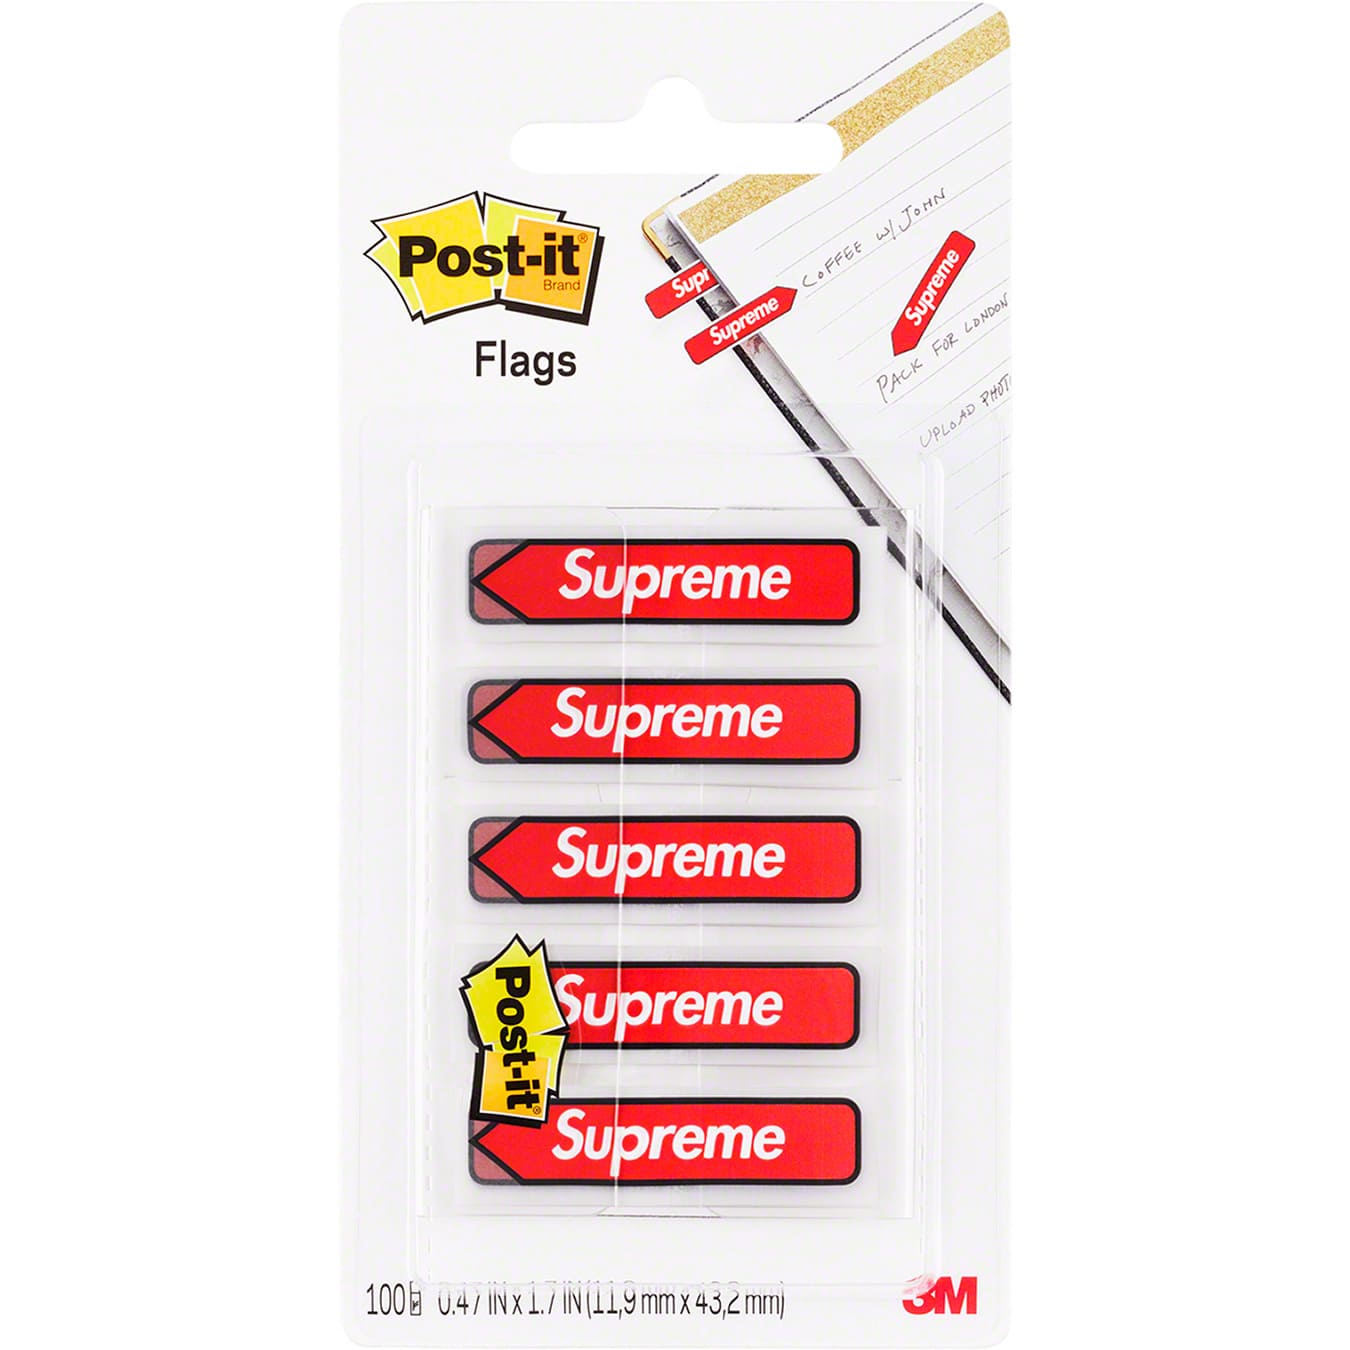 Supreme®/Post-it® Flags